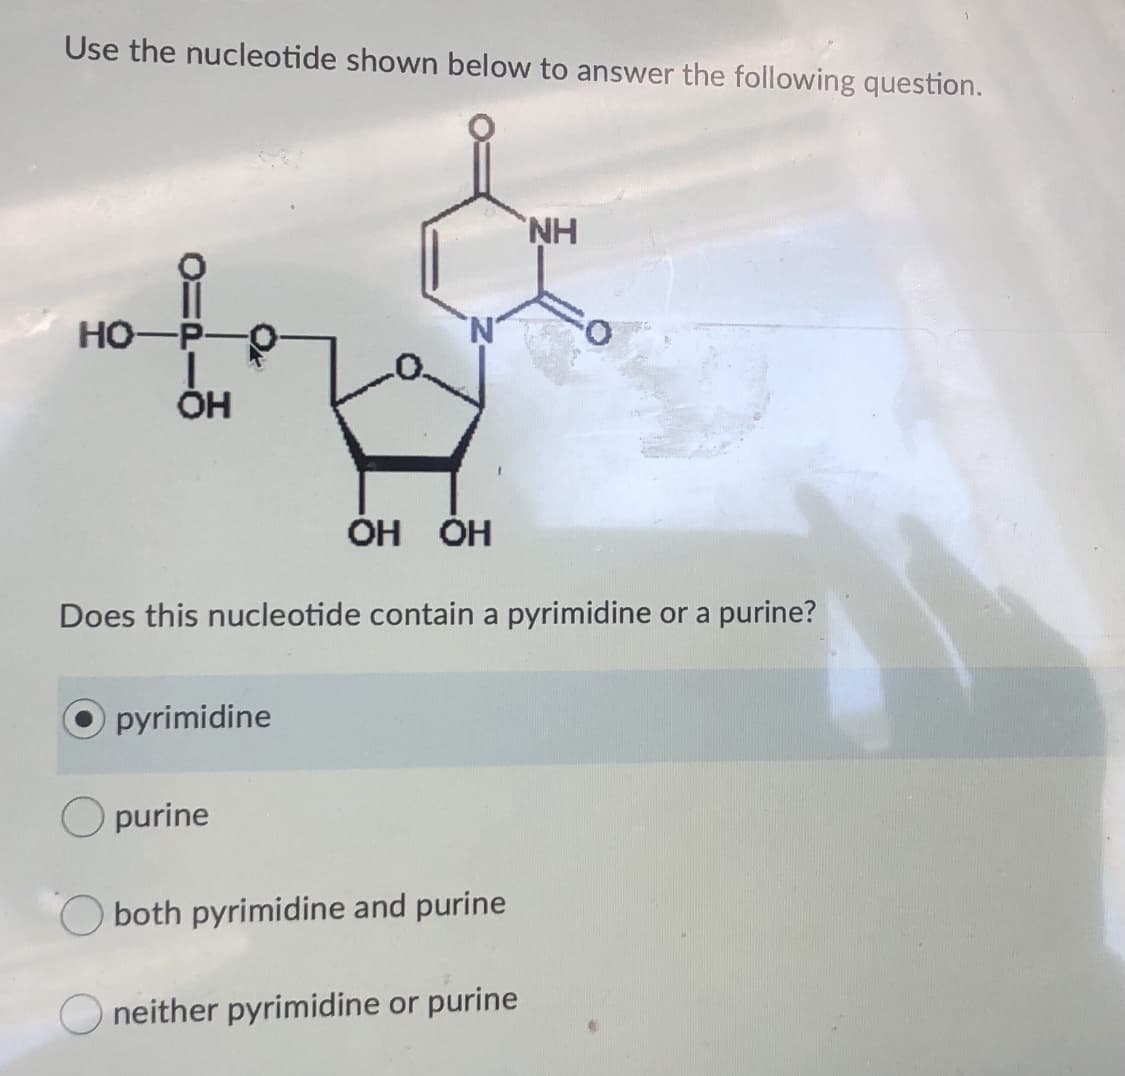 Use the nucleotide shown below to answer the following question.
но-
ÓH
OH OH
Does this nucleotide contain a pyrimidine or a purine?
O pyrimidine
O purine
O both pyrimidine and purine
neither pyrimidine or purine
